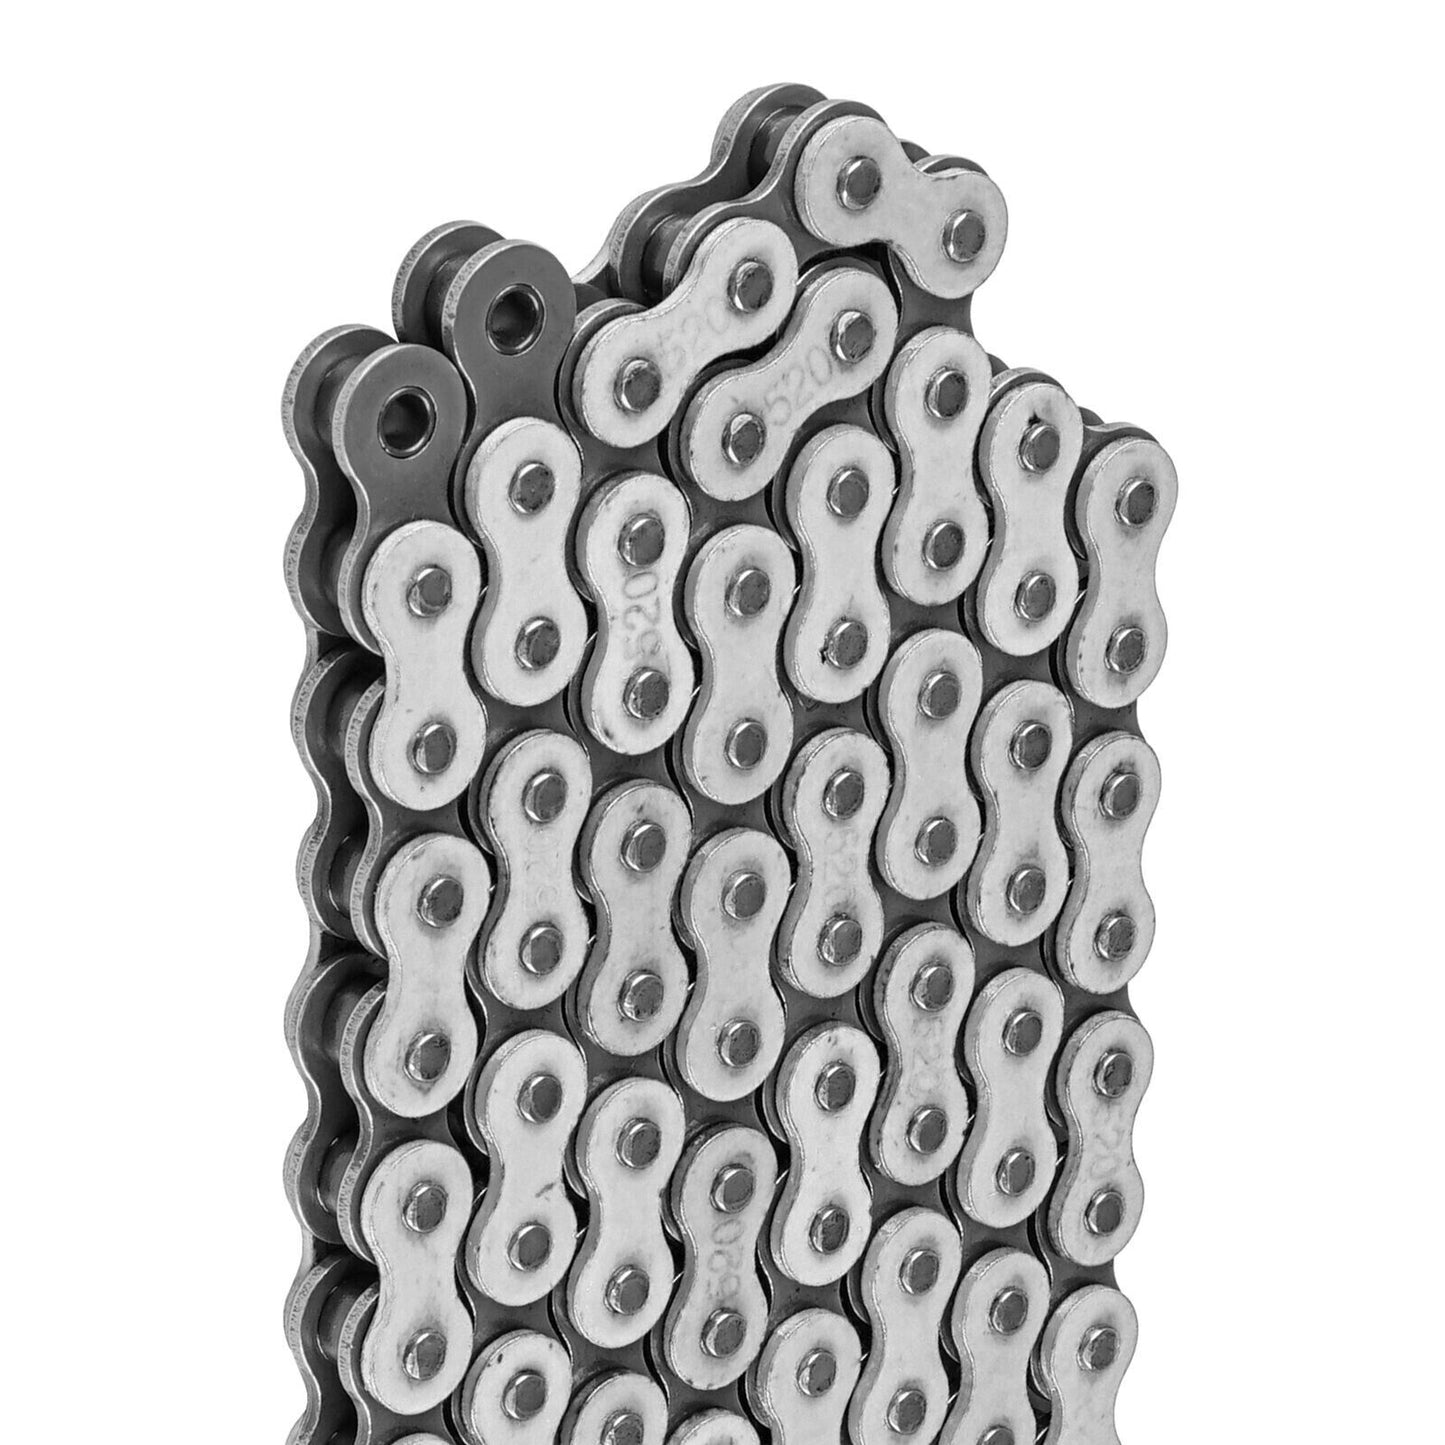 White Drive Chain for Bike | Motorcycle Quad 520-Pitch 120-Links Non O-Ring